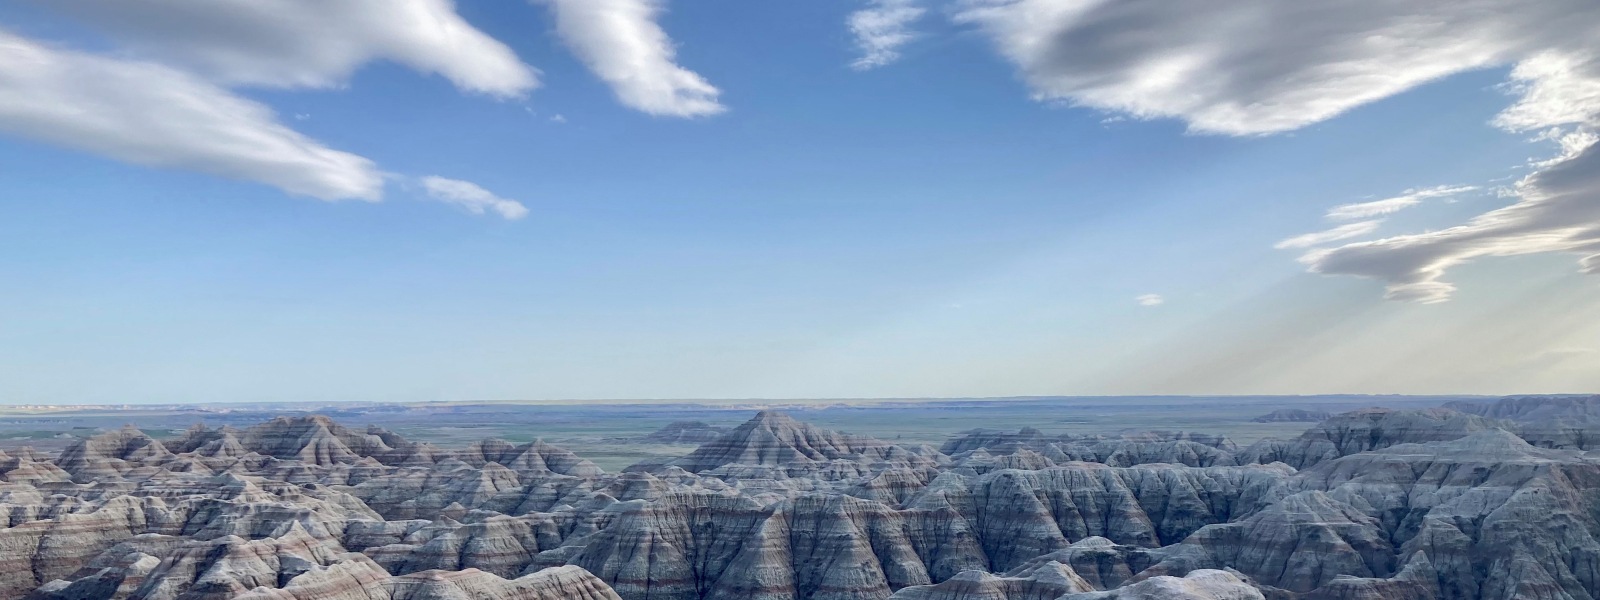 Landscape of mountains in the Badlands National Park with distinguished bands of color throughout the formations, blue skies with some clouds present.